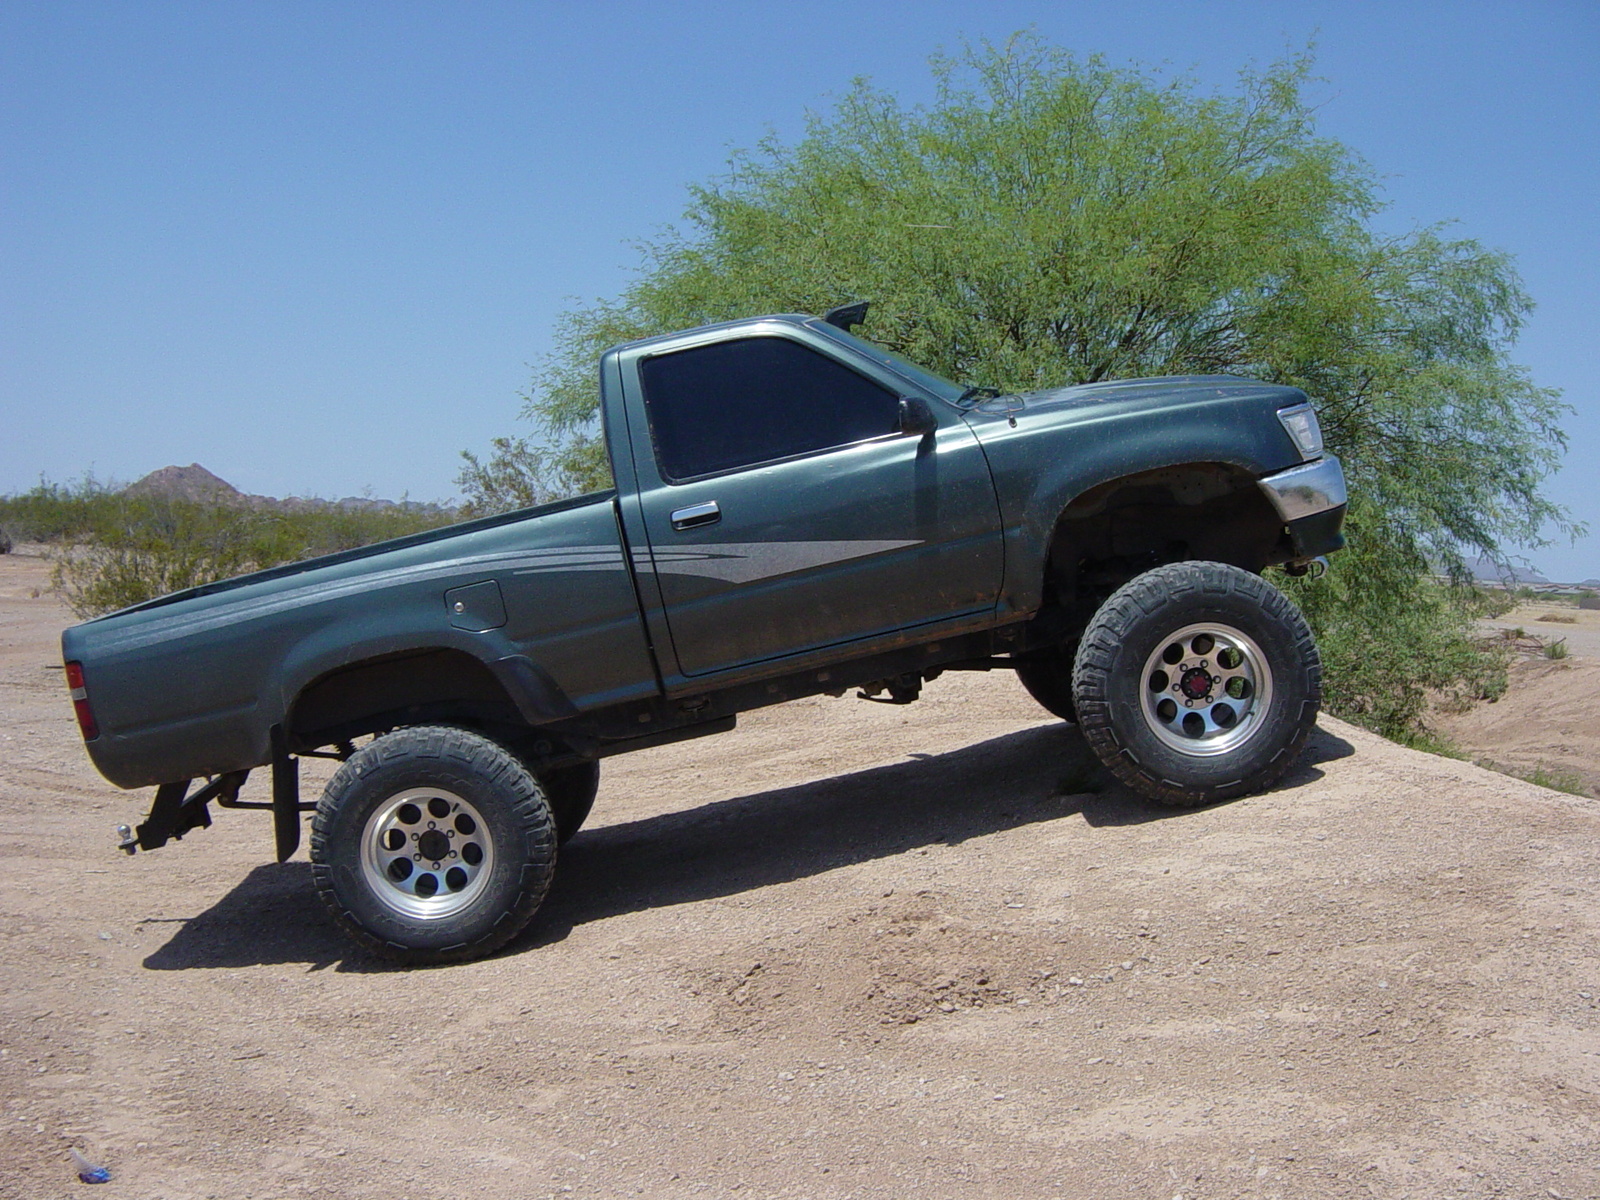 1993 Toyota pickup bed size